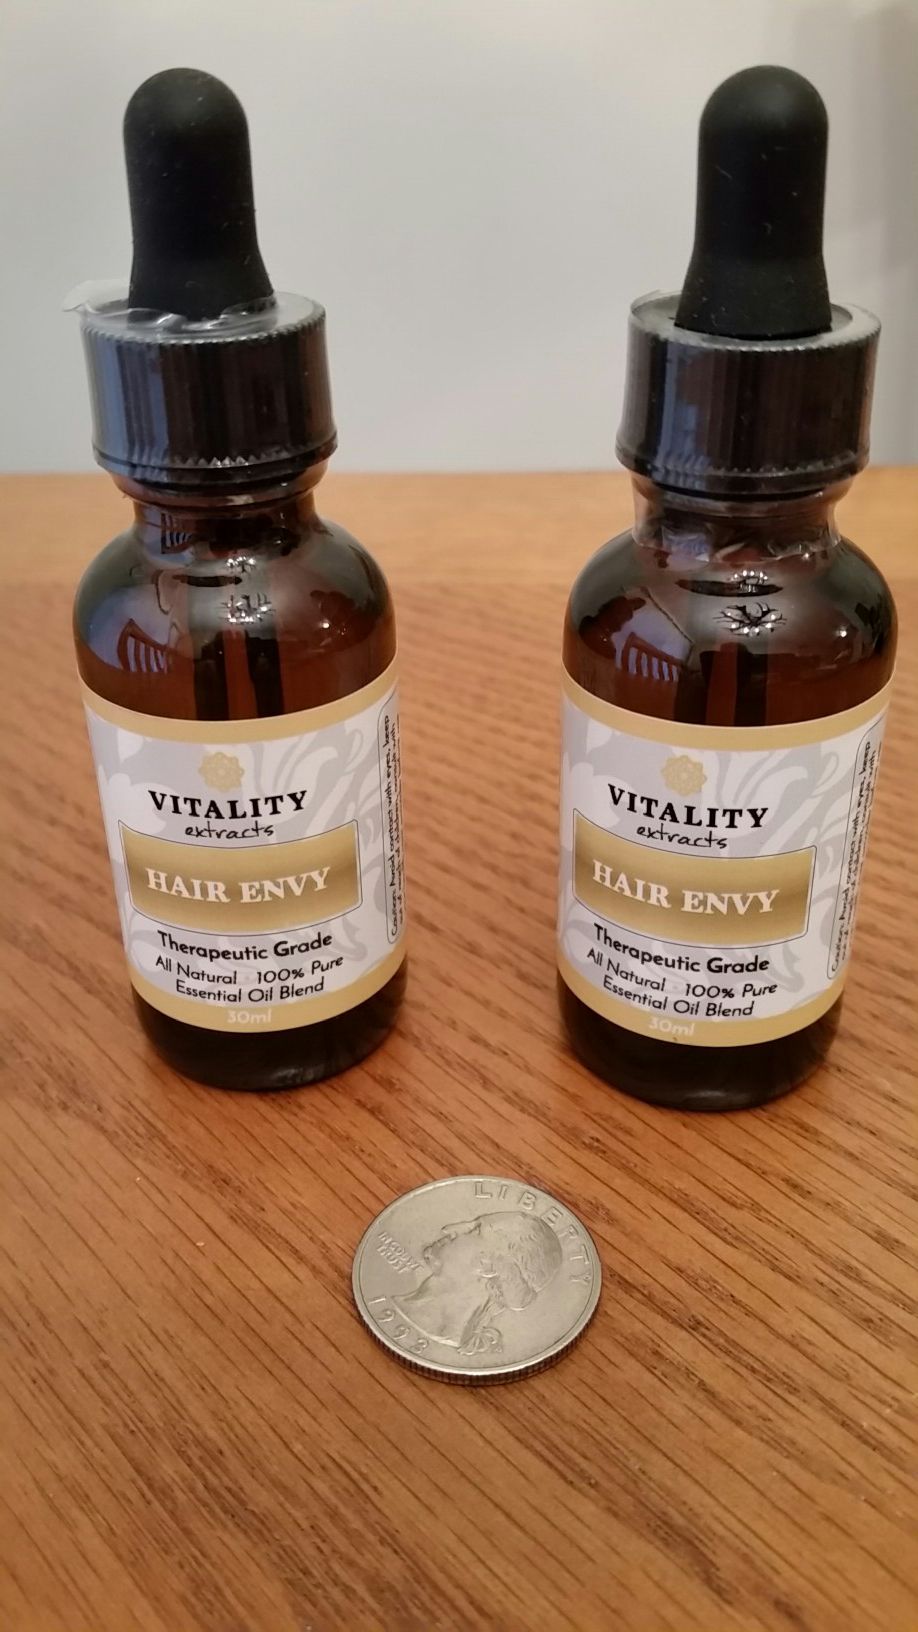 HAIR ENVY Vitality Extracts Natural Essential Oil 30ml Therapeutic